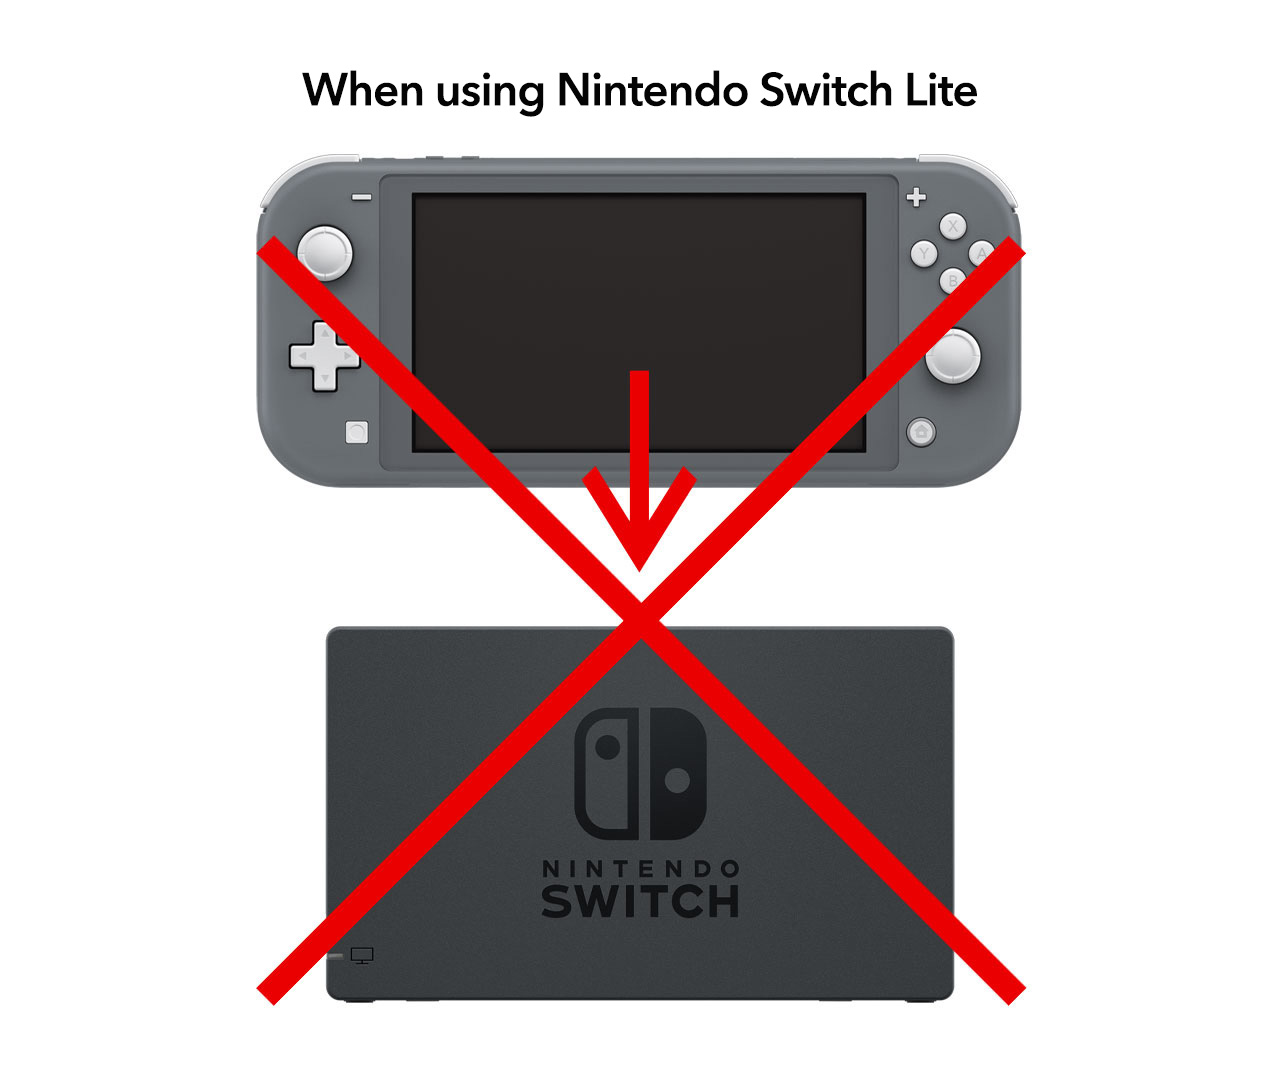 Nintendo Switch Lite cannot be inserted into the Nintendo Switch dock.